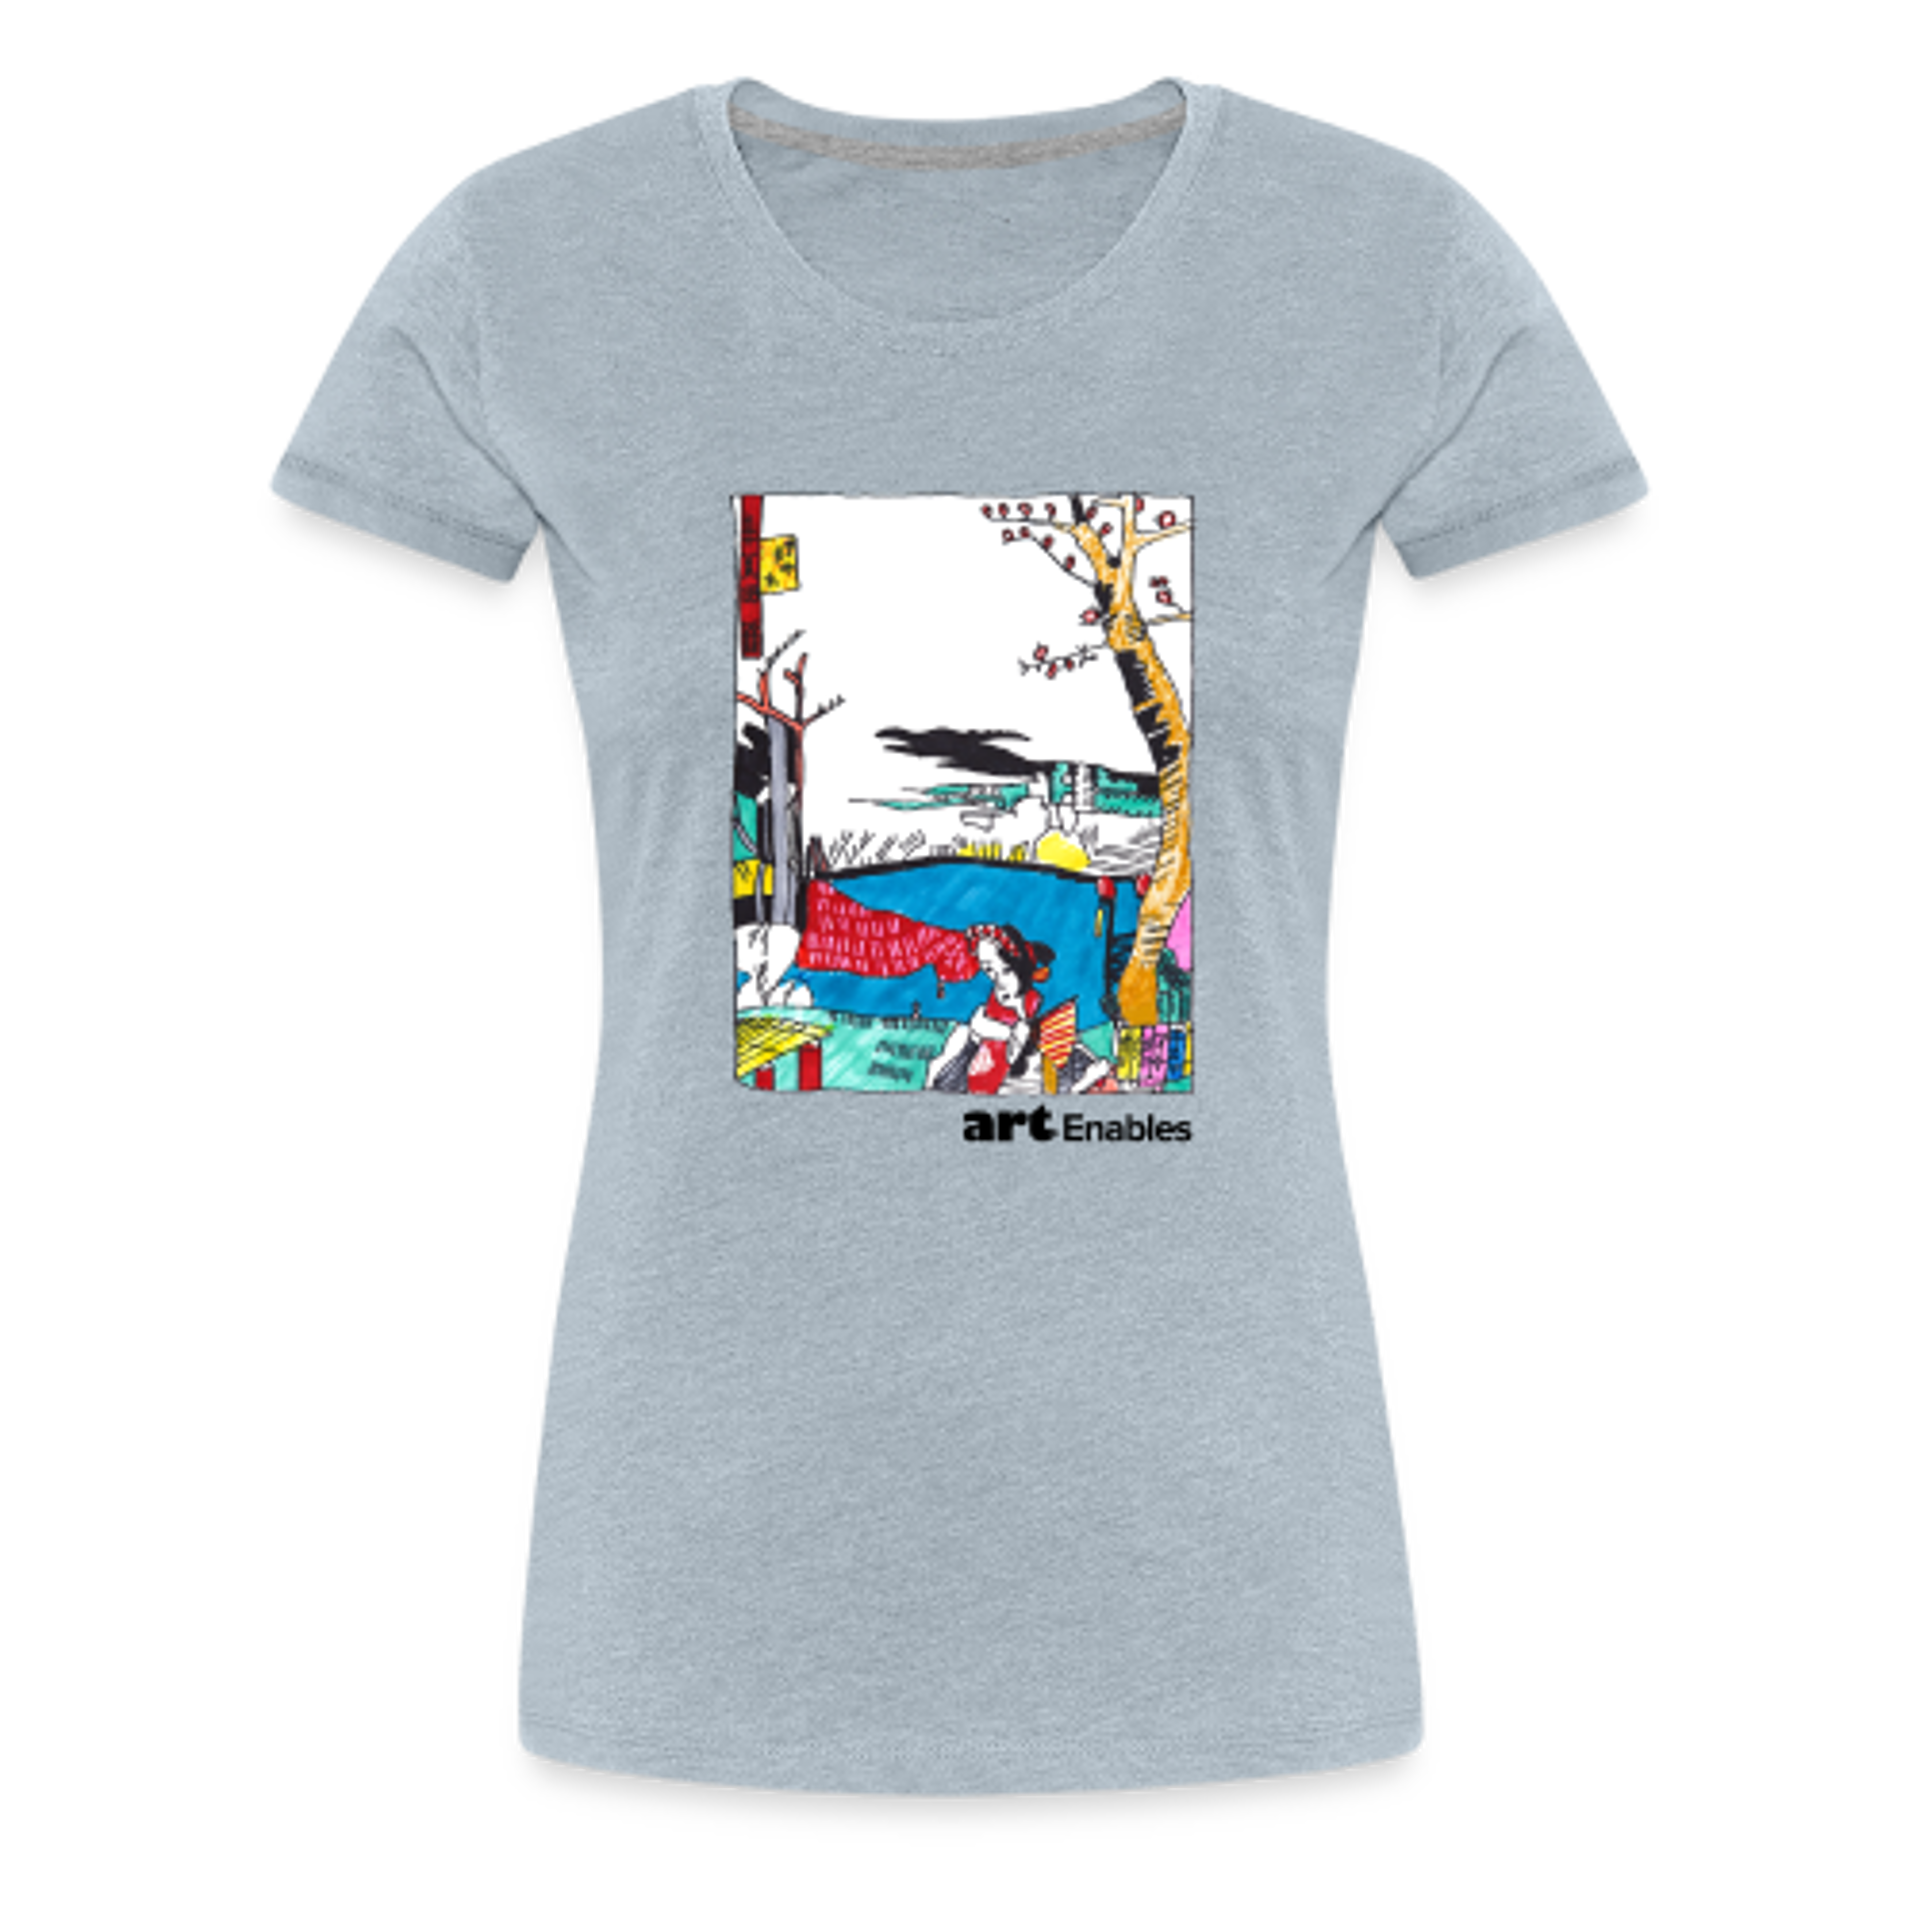 Women's T-shirt (artwork by Charles Meissner) Medium - heather ice blue by Art Enables Merchandise